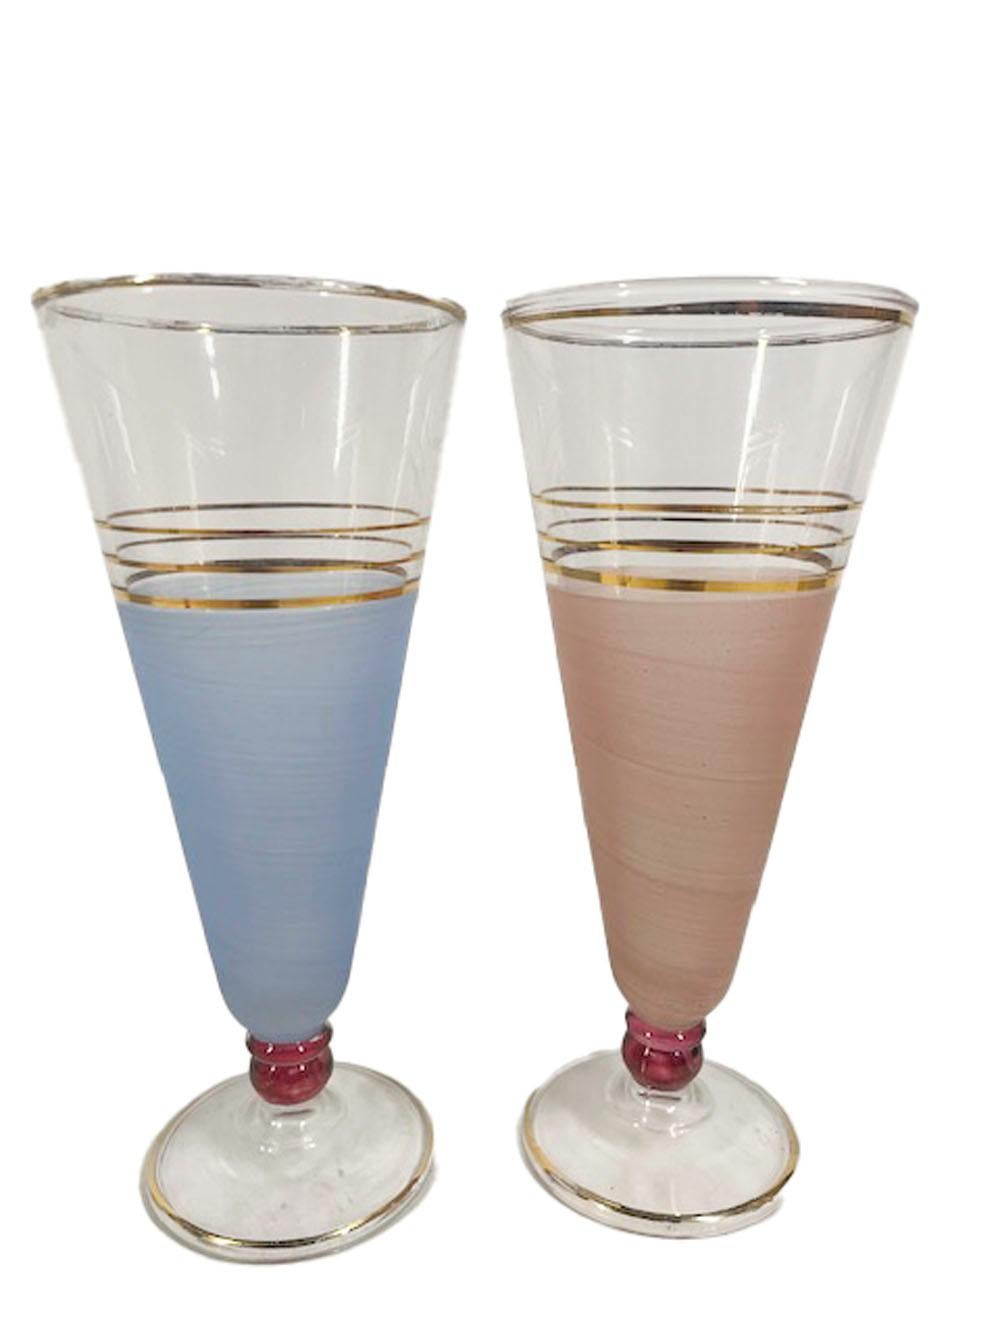 American Mid-Century Pastel Frosted Pilsner Glasses with 22 Karat Gold Lines and Rims